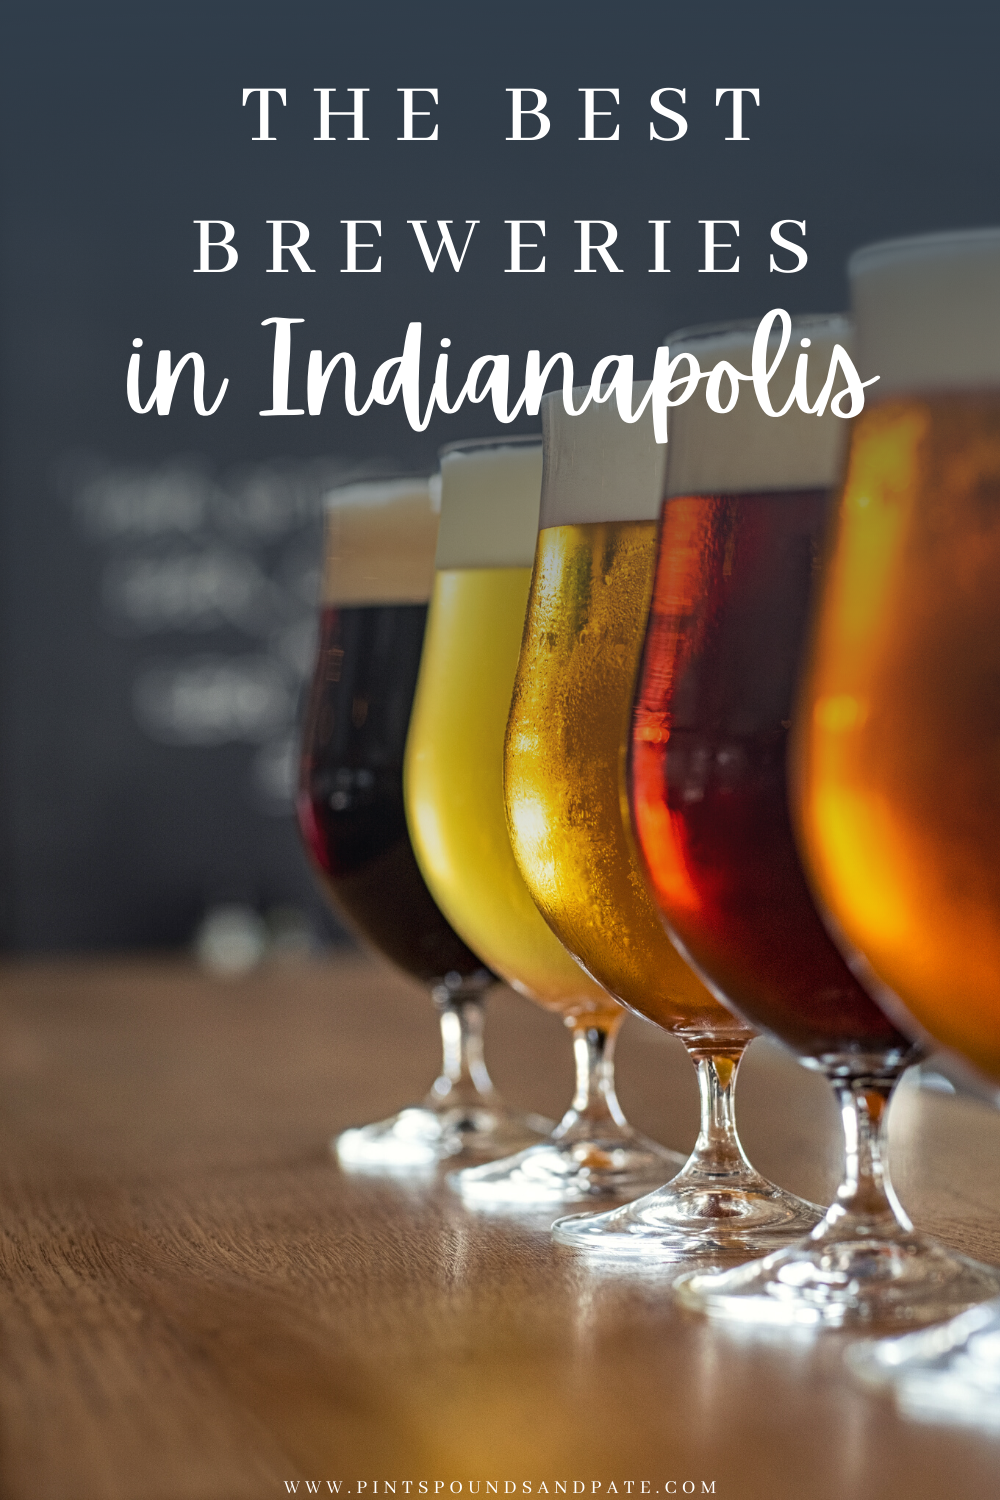 The Best Breweries in Downtown Indianapolis